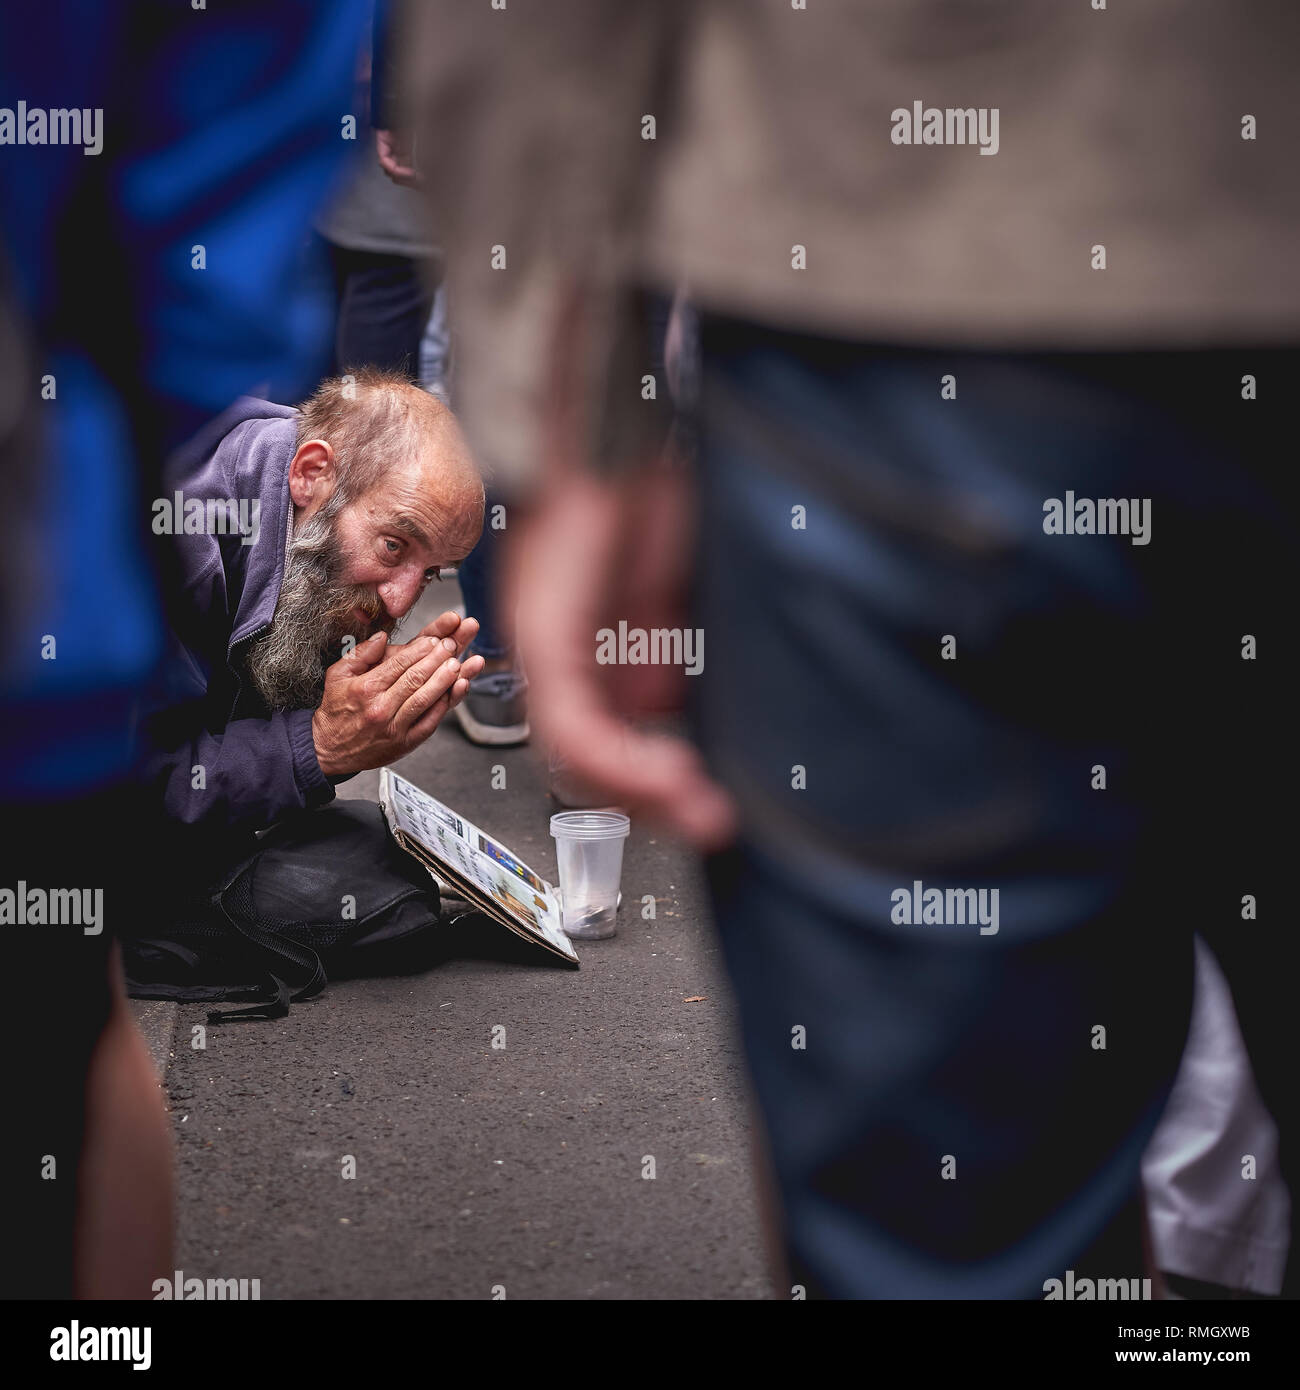 London, UK - June, 2018. An old homeless man begging for help in a crowded Borough Market. Stock Photo